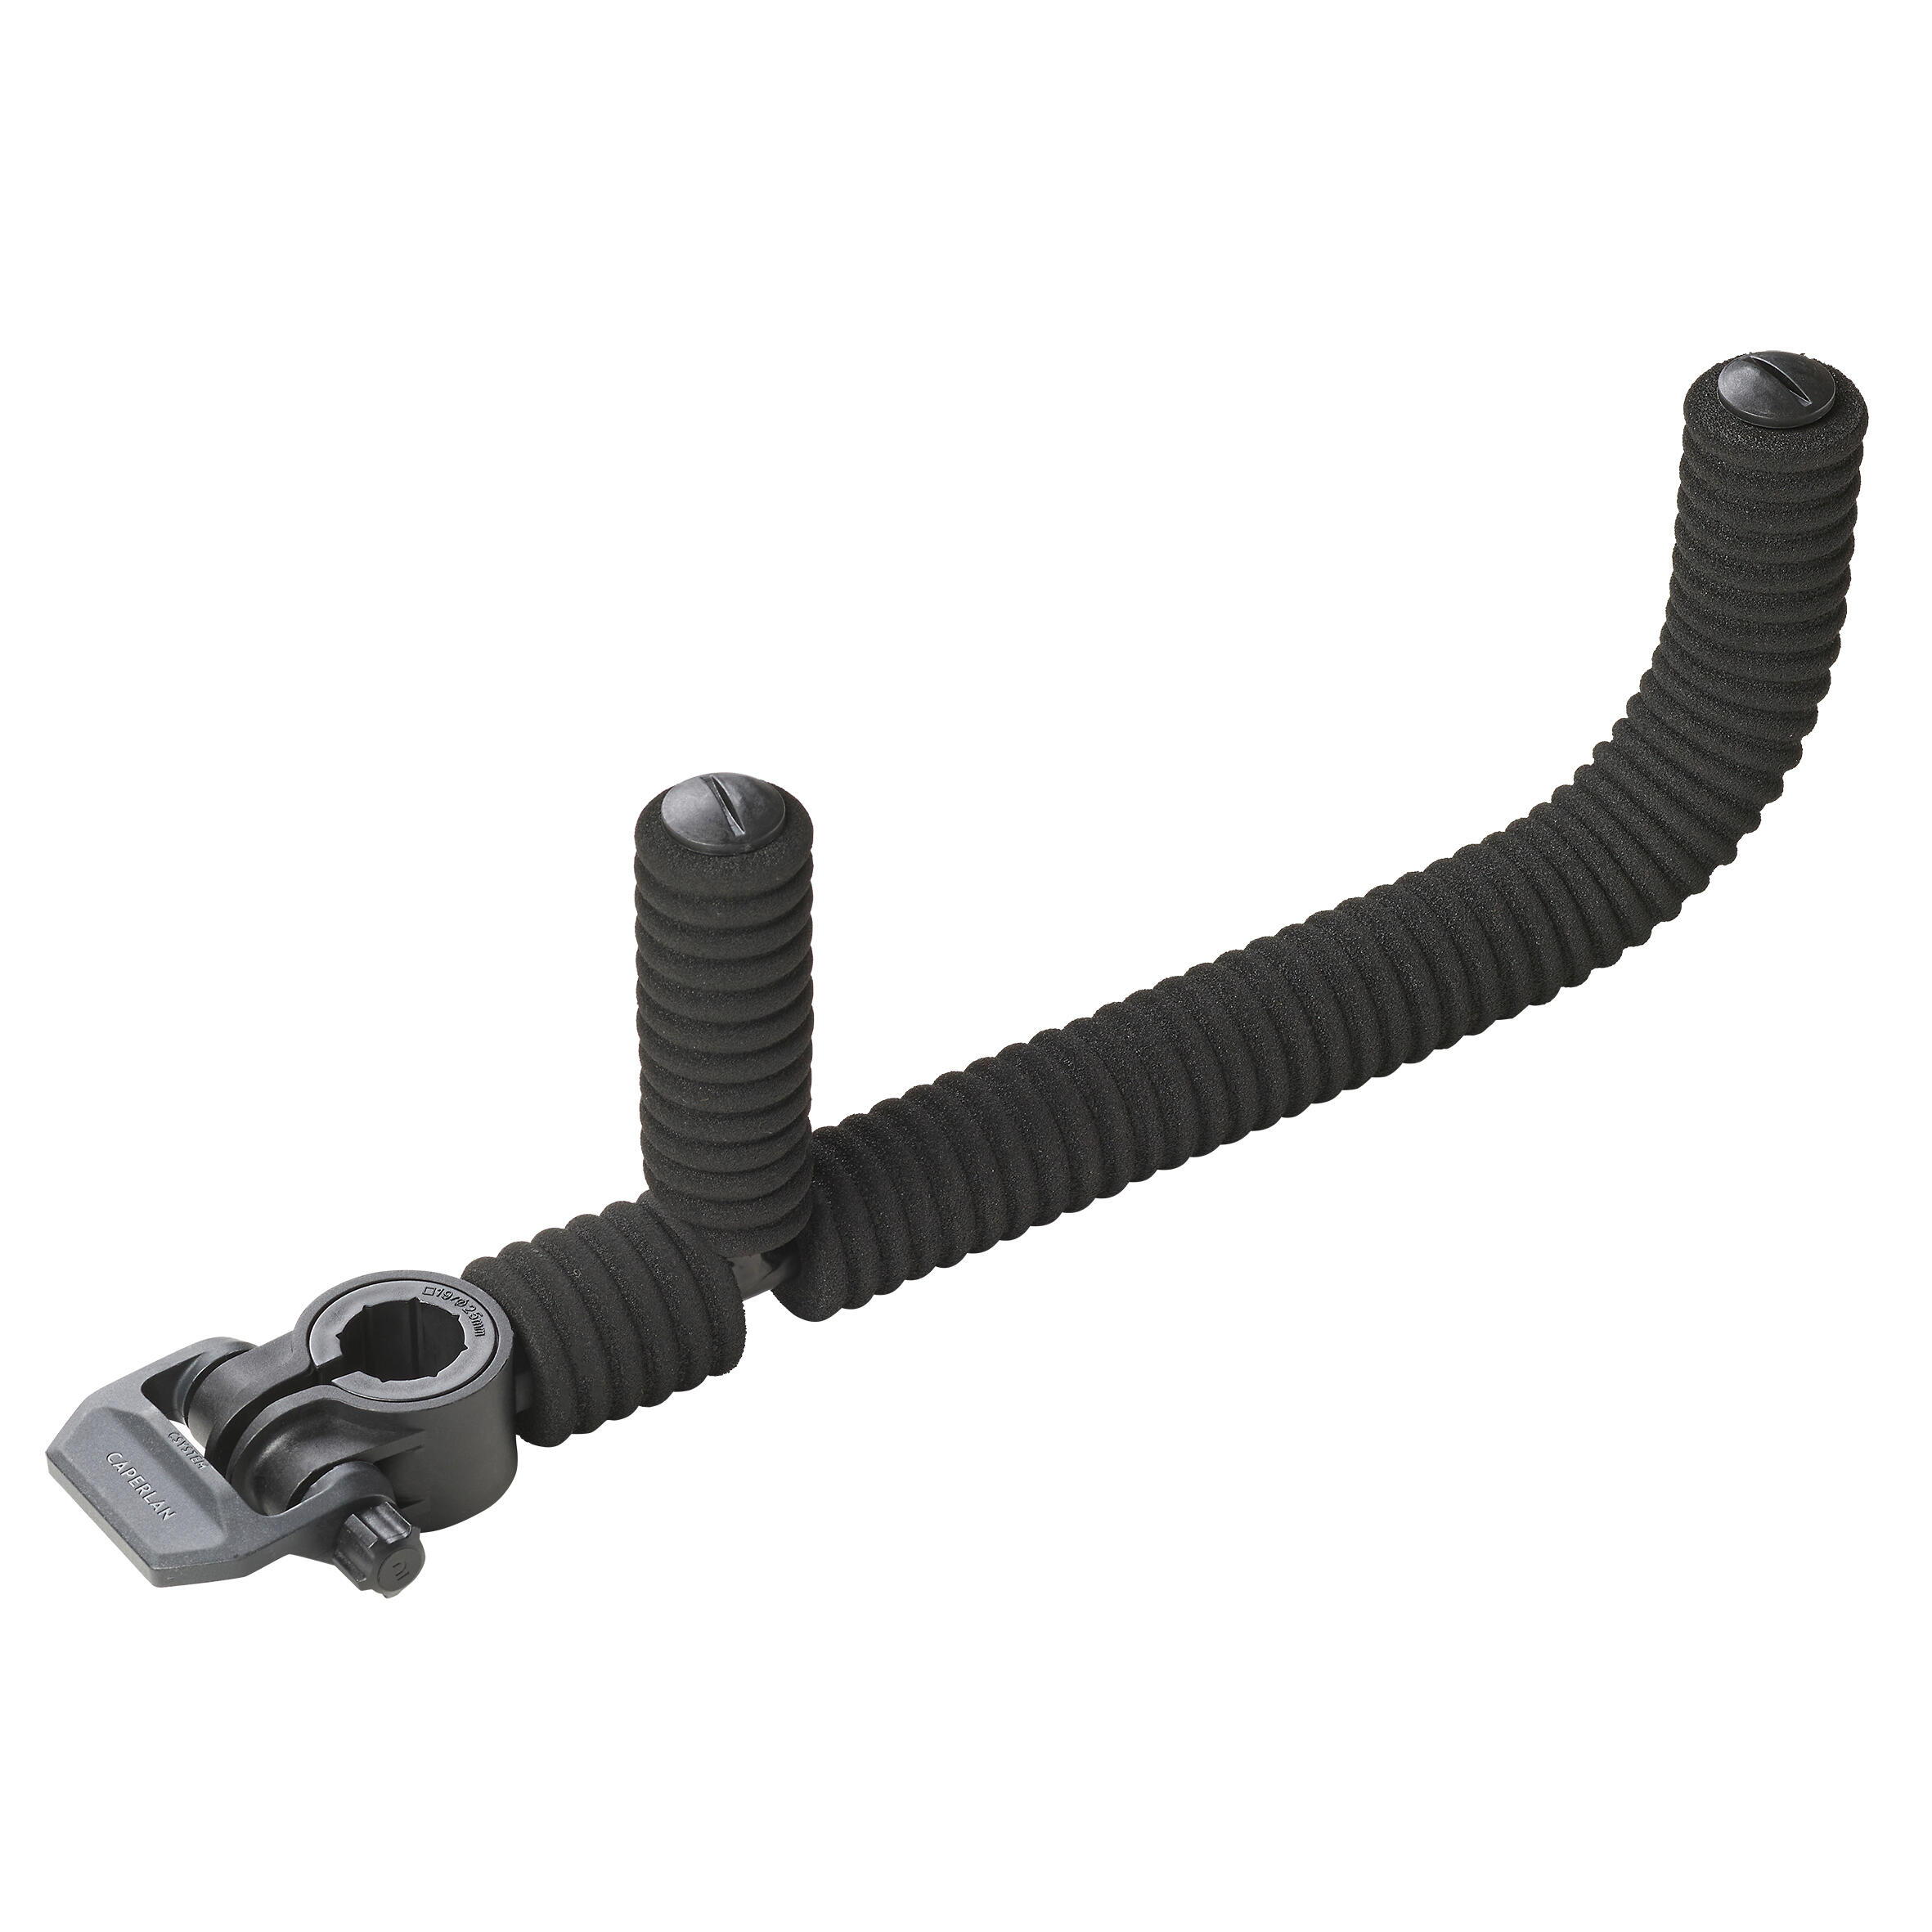 INNOVATIVE DOUBLE CURVED CSB CADF EVA FOAM ARM STATION COMPATIBLE 1/3